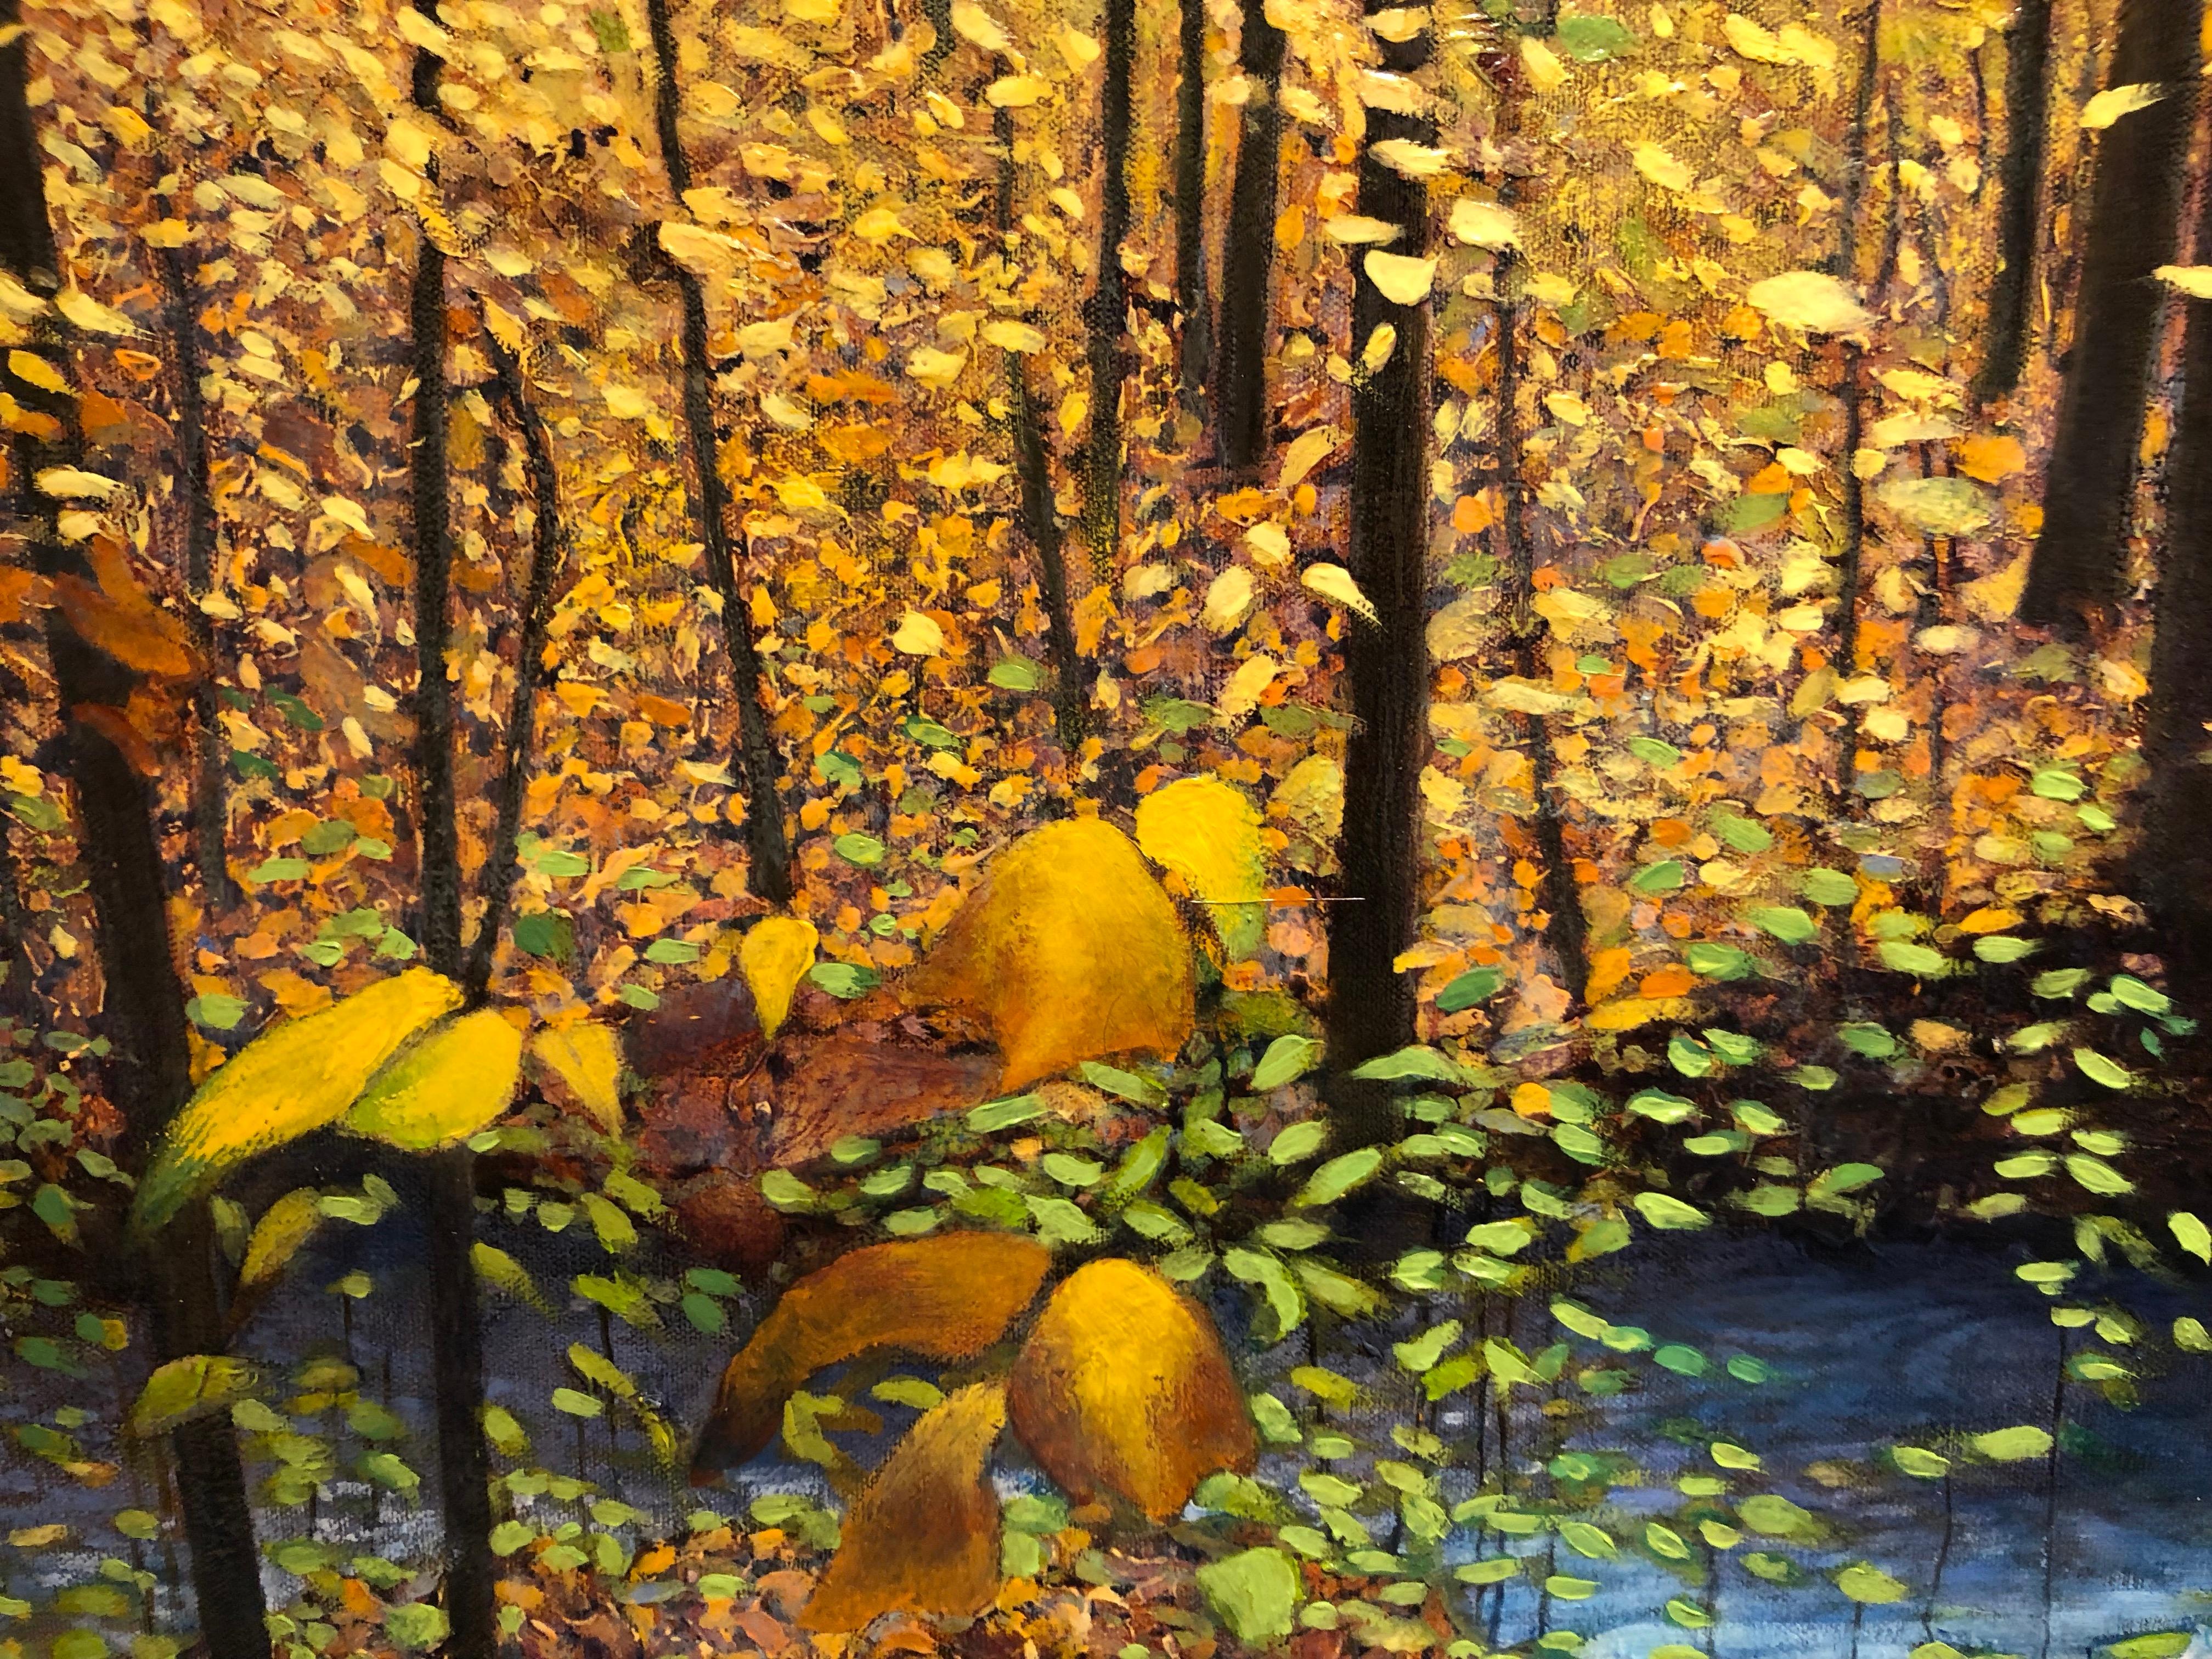 The Turning - Original Oil Painting of Stream and Trees with Leaf Covered Forest 7